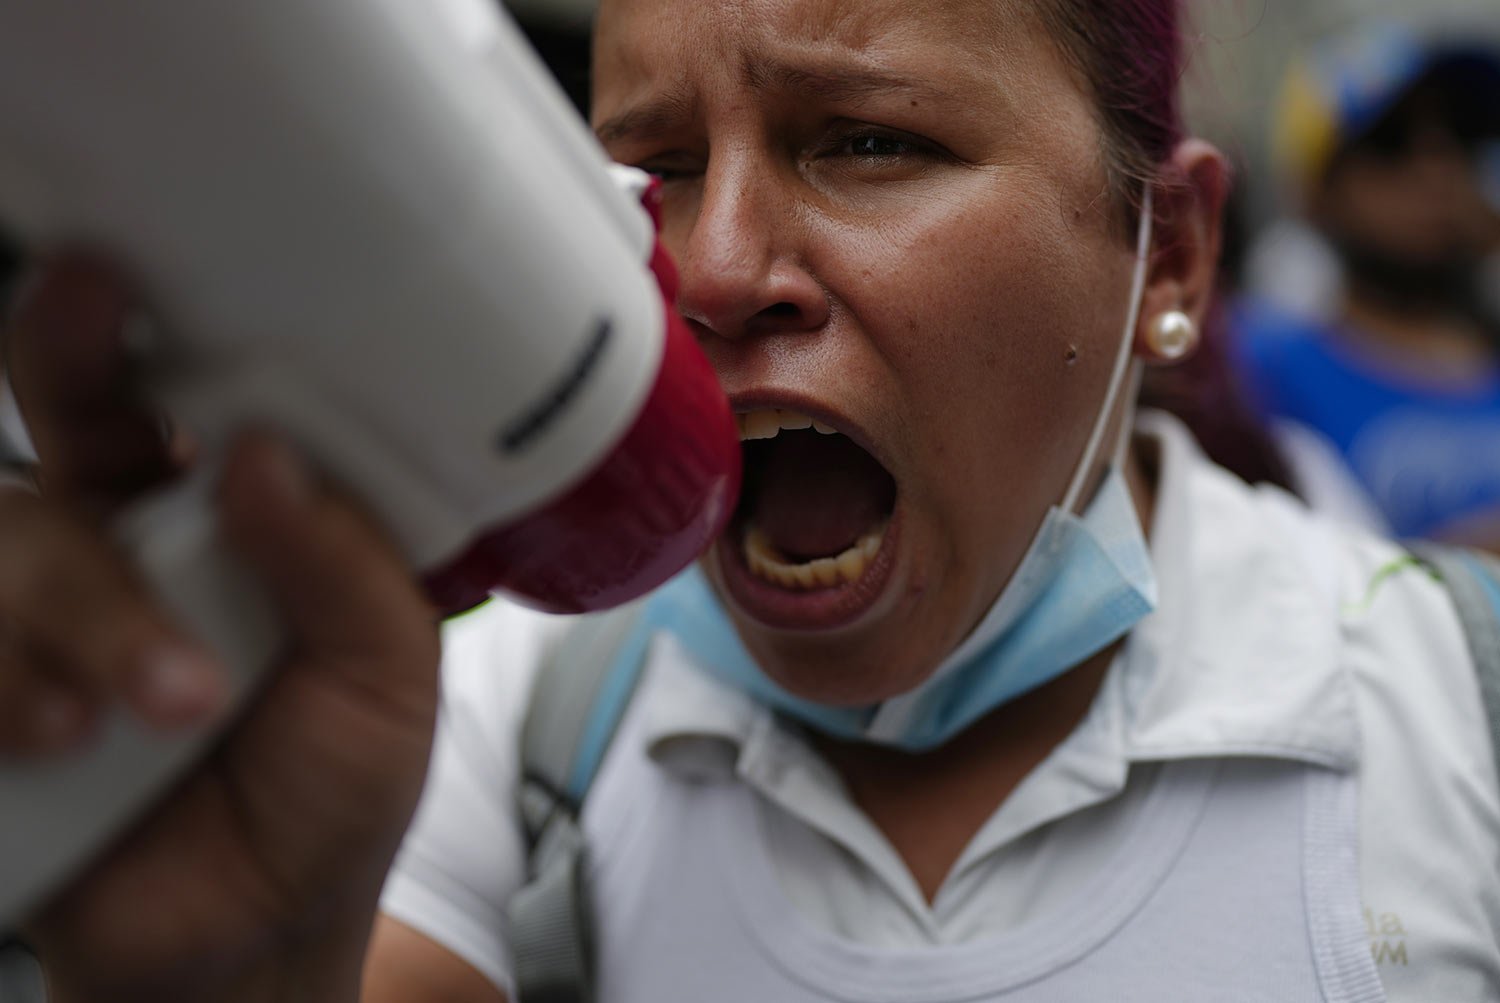  A nurse uses a megaphone during a protest by active and retired public workers demanding the government pay their full benefits and respect collective bargaining agreements, in Caracas, Venezuela, Tuesday, Aug. 23, 2022. (AP Photo/Ariana Cubillos) 